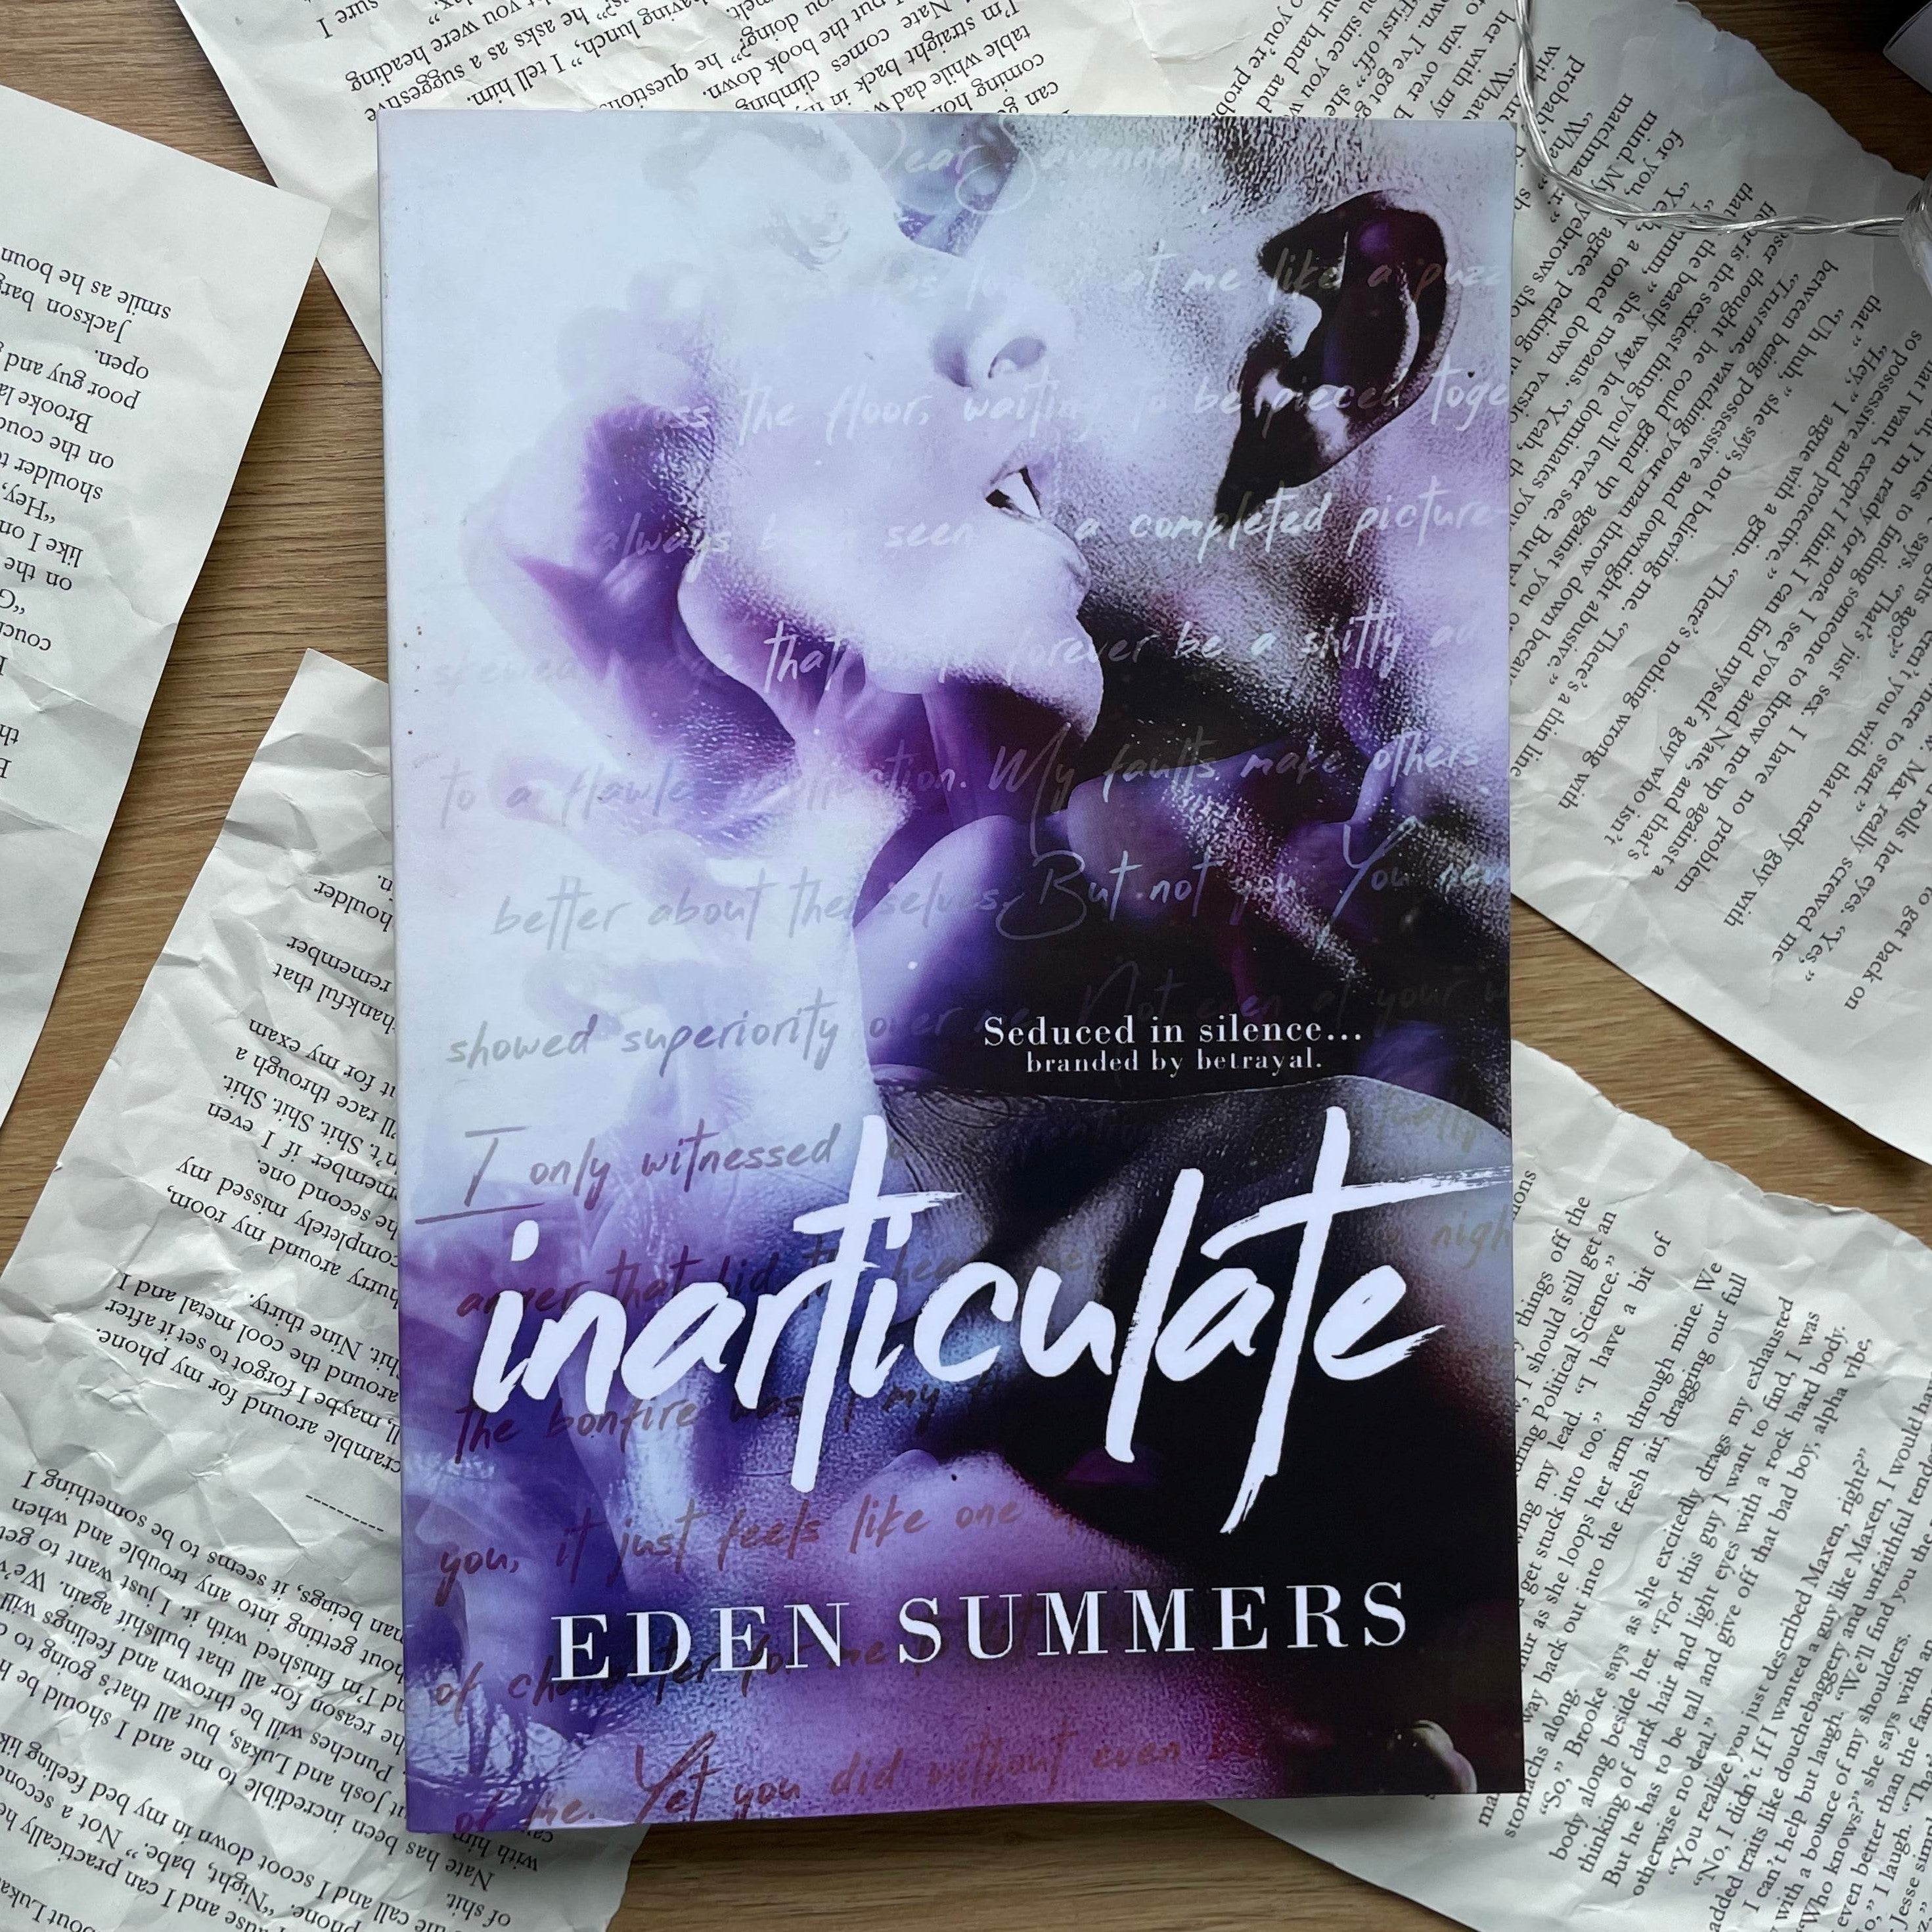 Inarticulate by Eden Summers